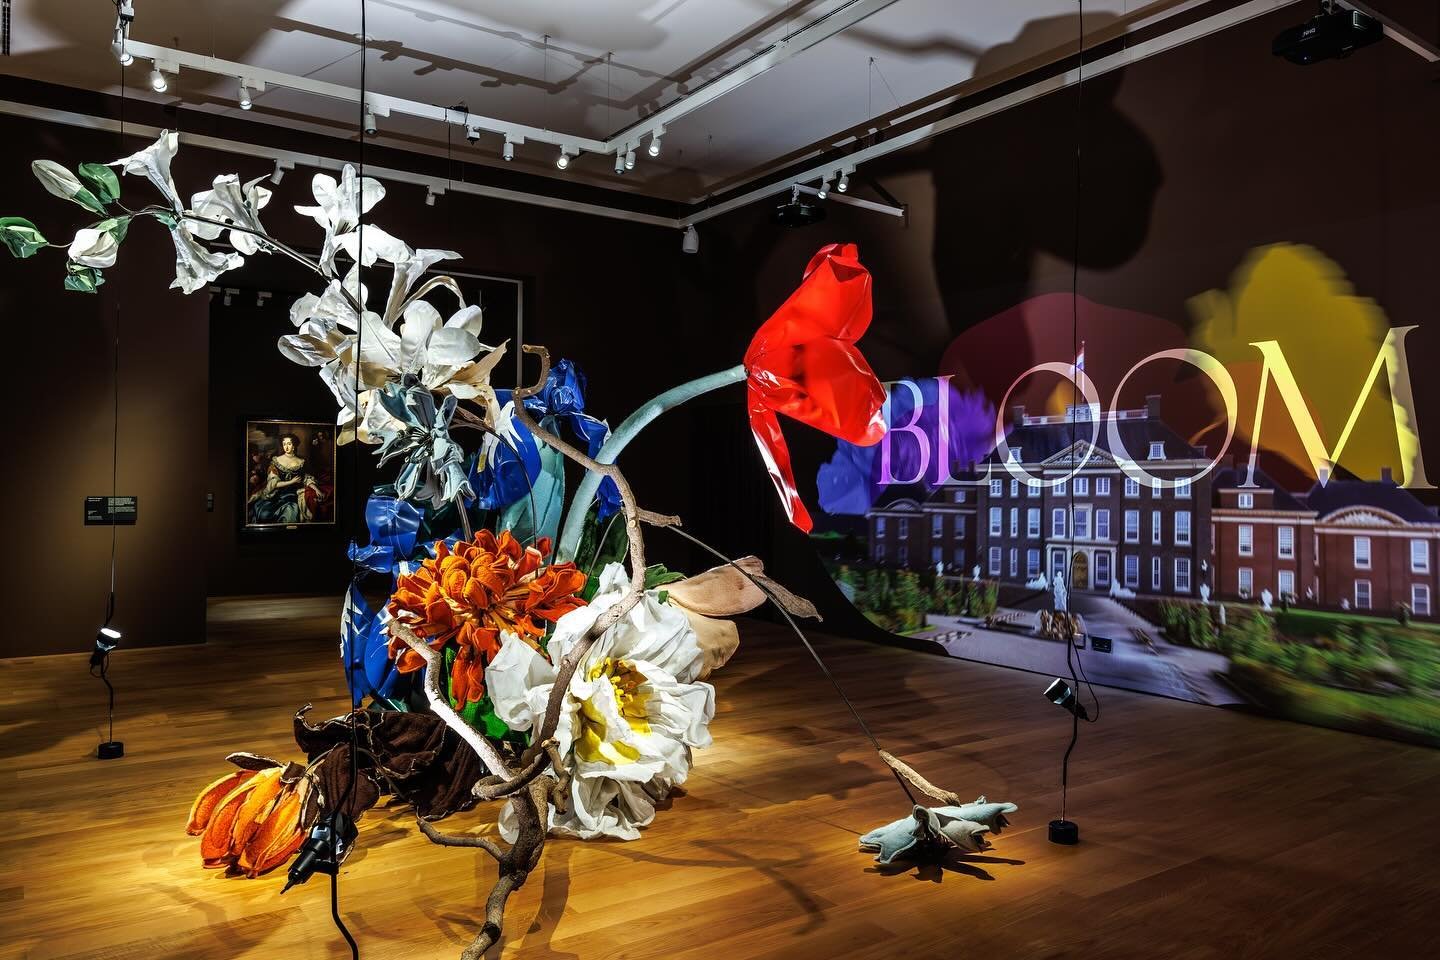 The &ldquo;Bloom&rdquo; exhibition at @paleishetloo is now open to the public! It takes you into the world of flowers, from 17th-century still life paintings and Princess Mary II&rsquo;s influence on the use of flowers to artwork from contemporary ar